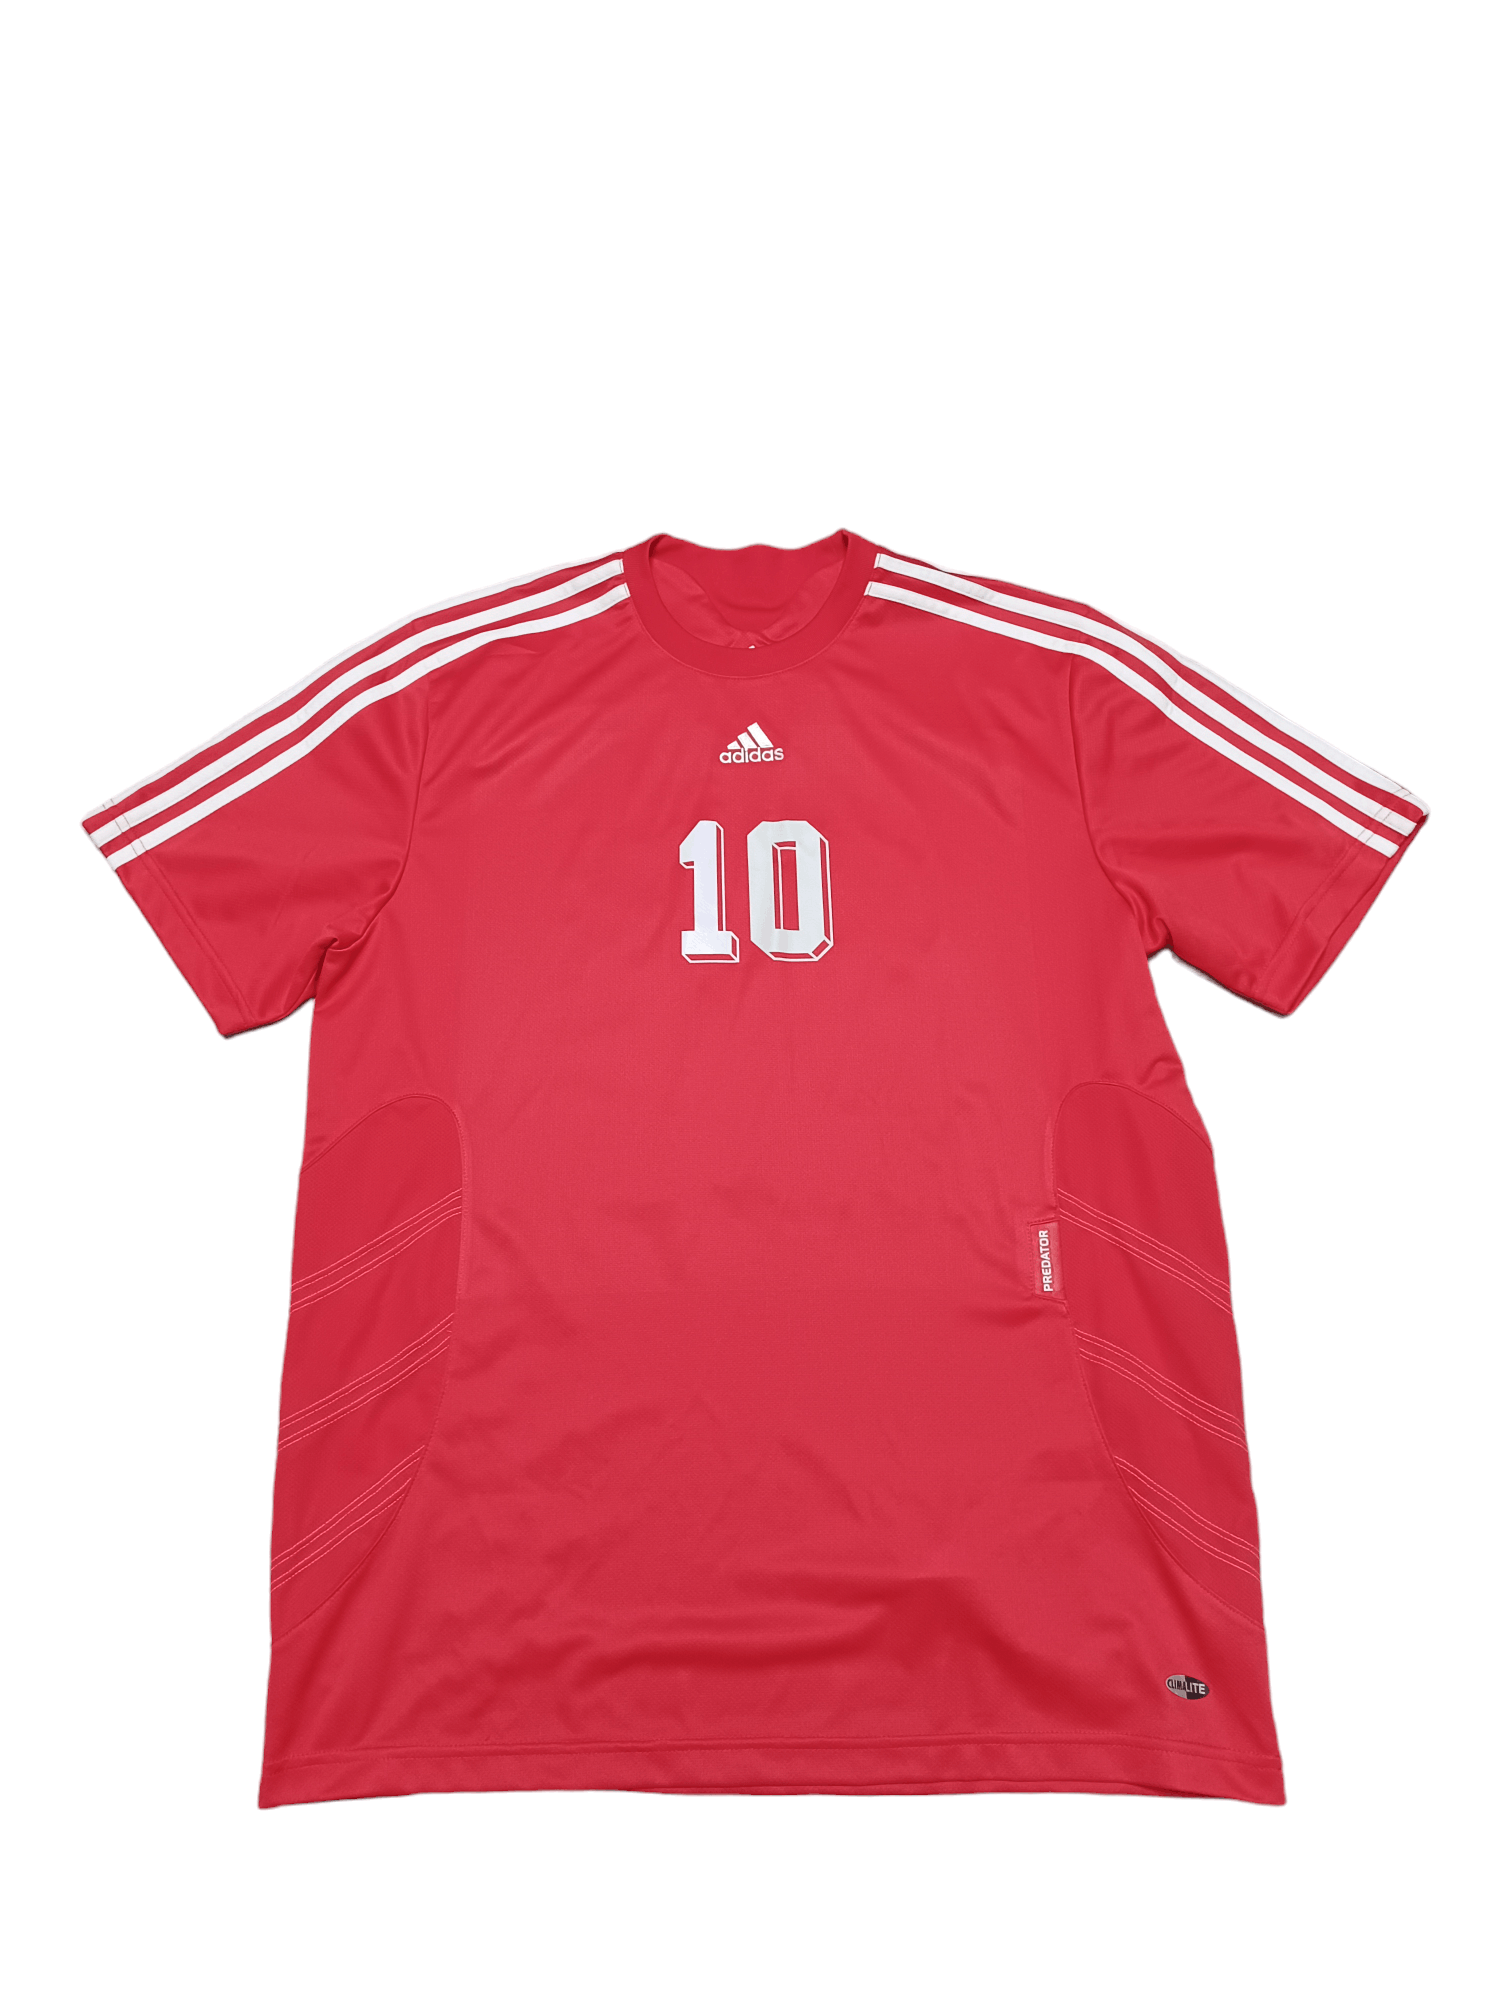 Pre-owned Adidas X Soccer Jersey 2007 Vintage Adidas Predator 10 Soccer Jersey Football In Red